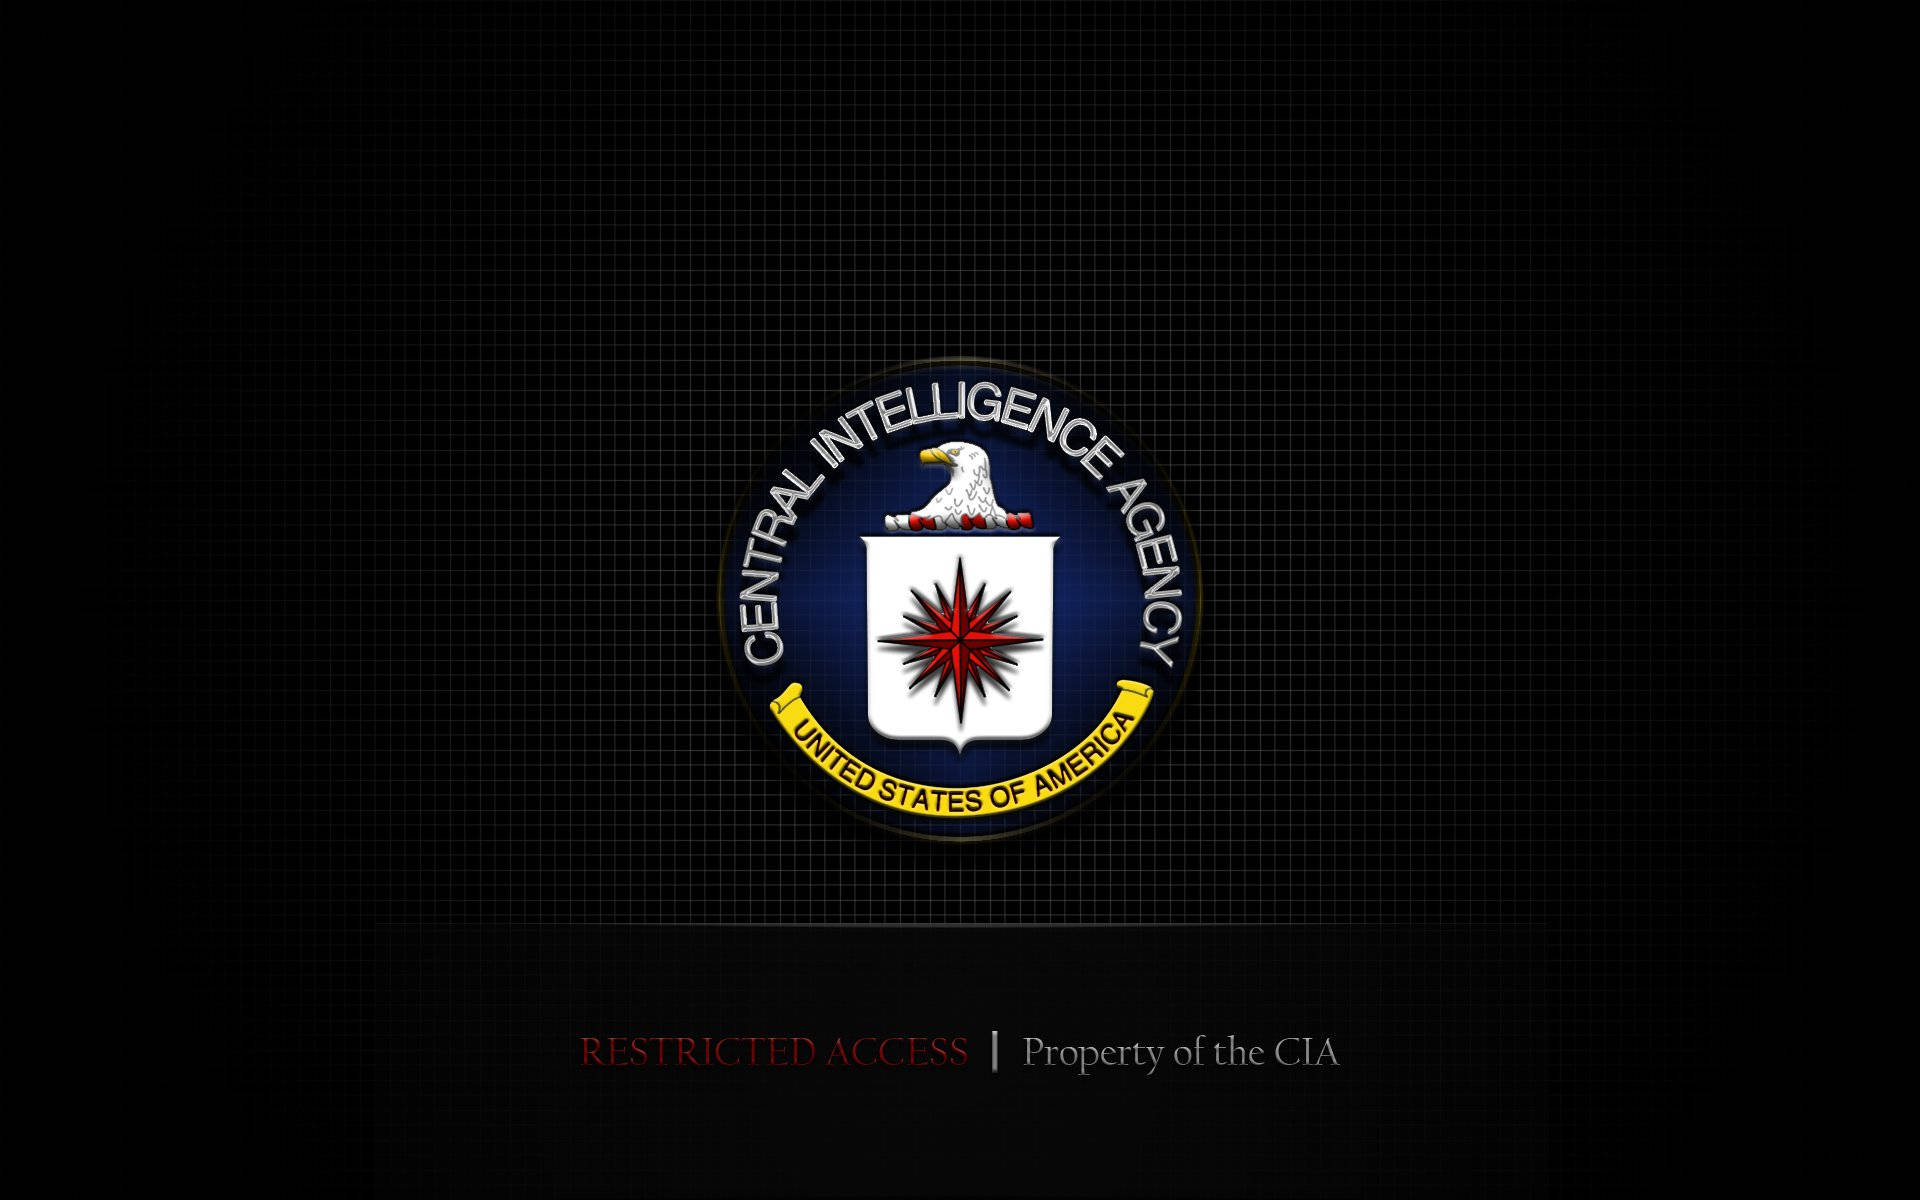 Cia Logo Restricted Access